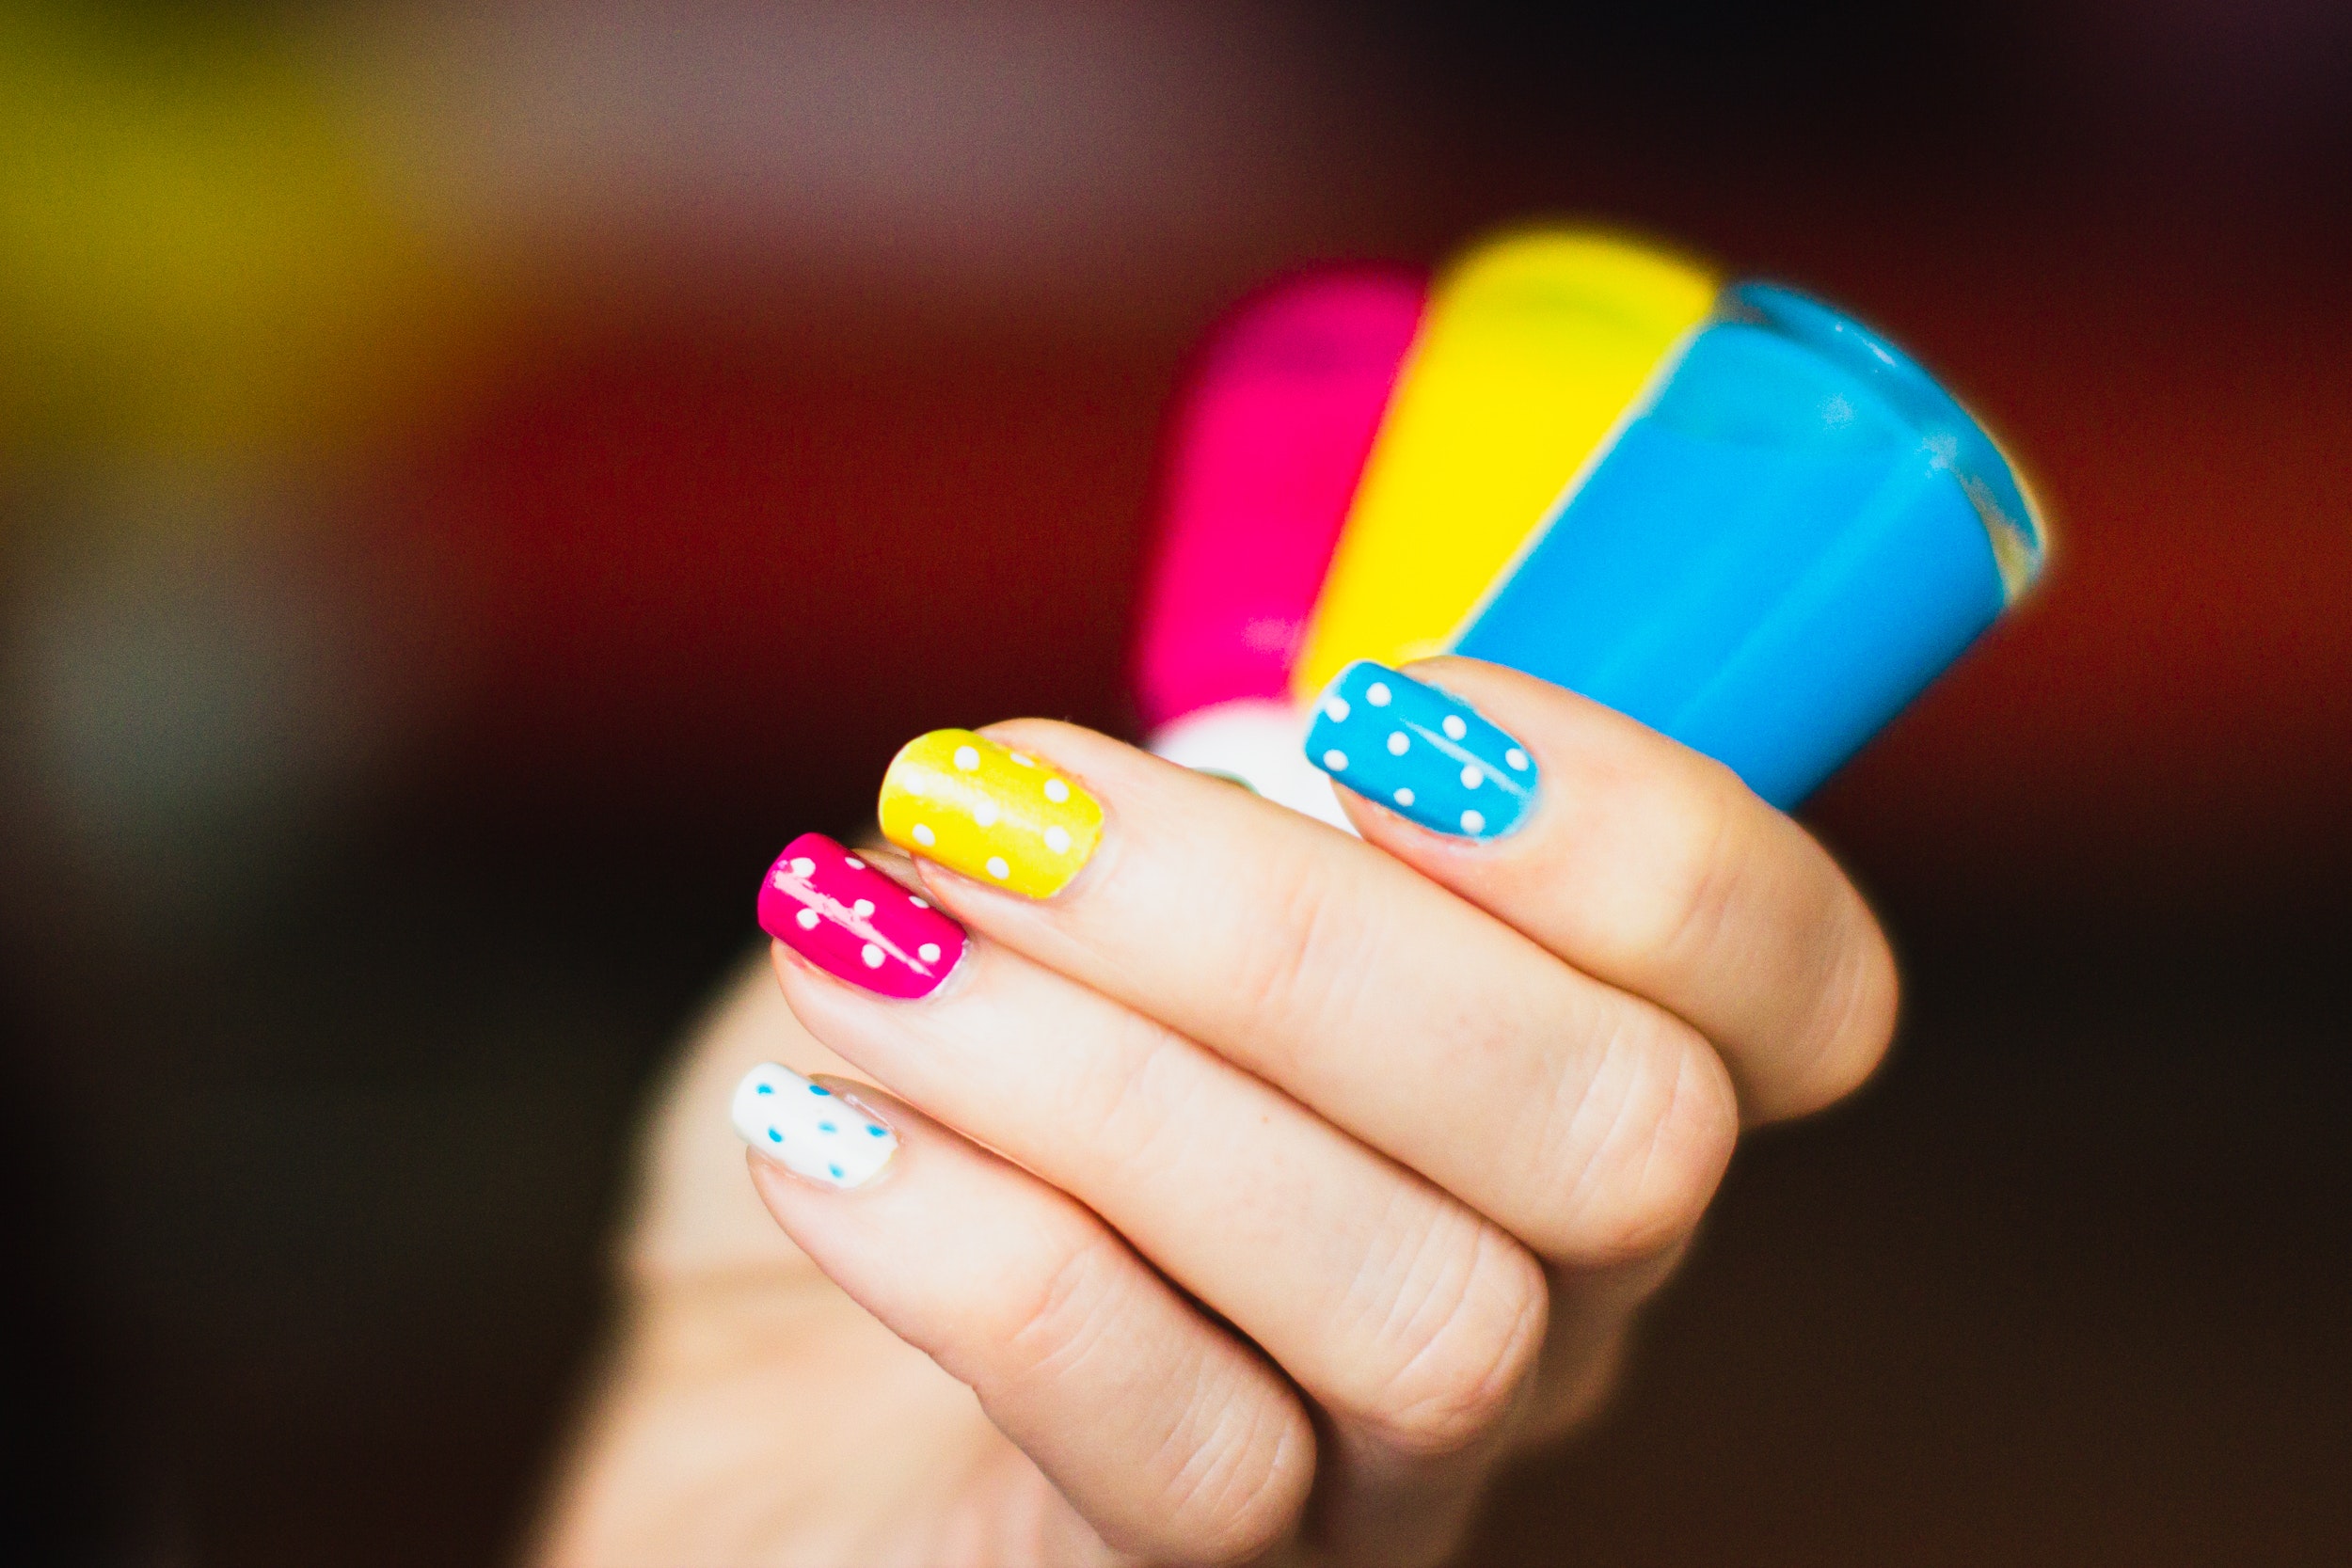 How To Select The Right Colors In Nail Art? 1